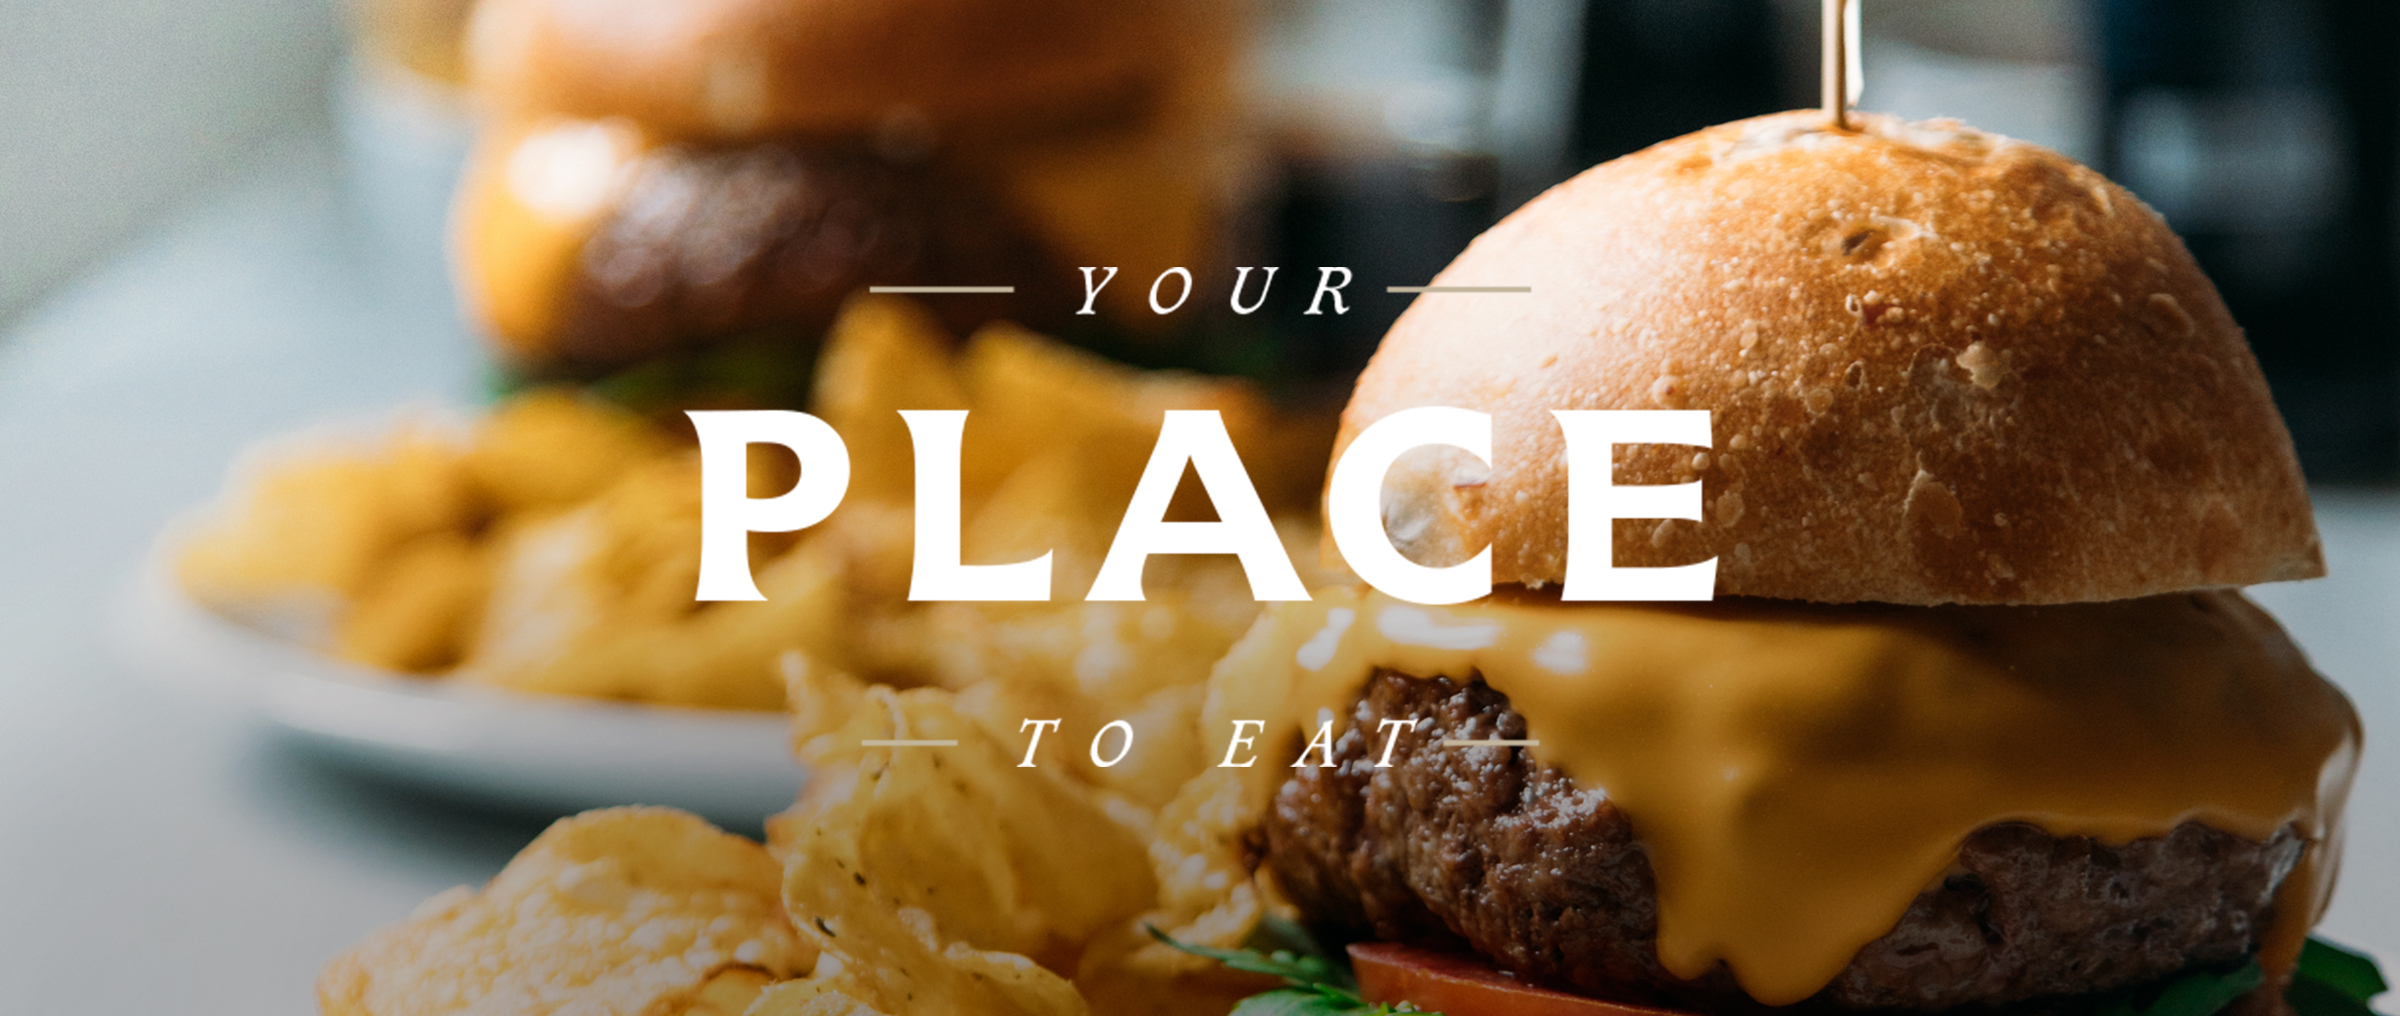 your place to eat - appetizing burger